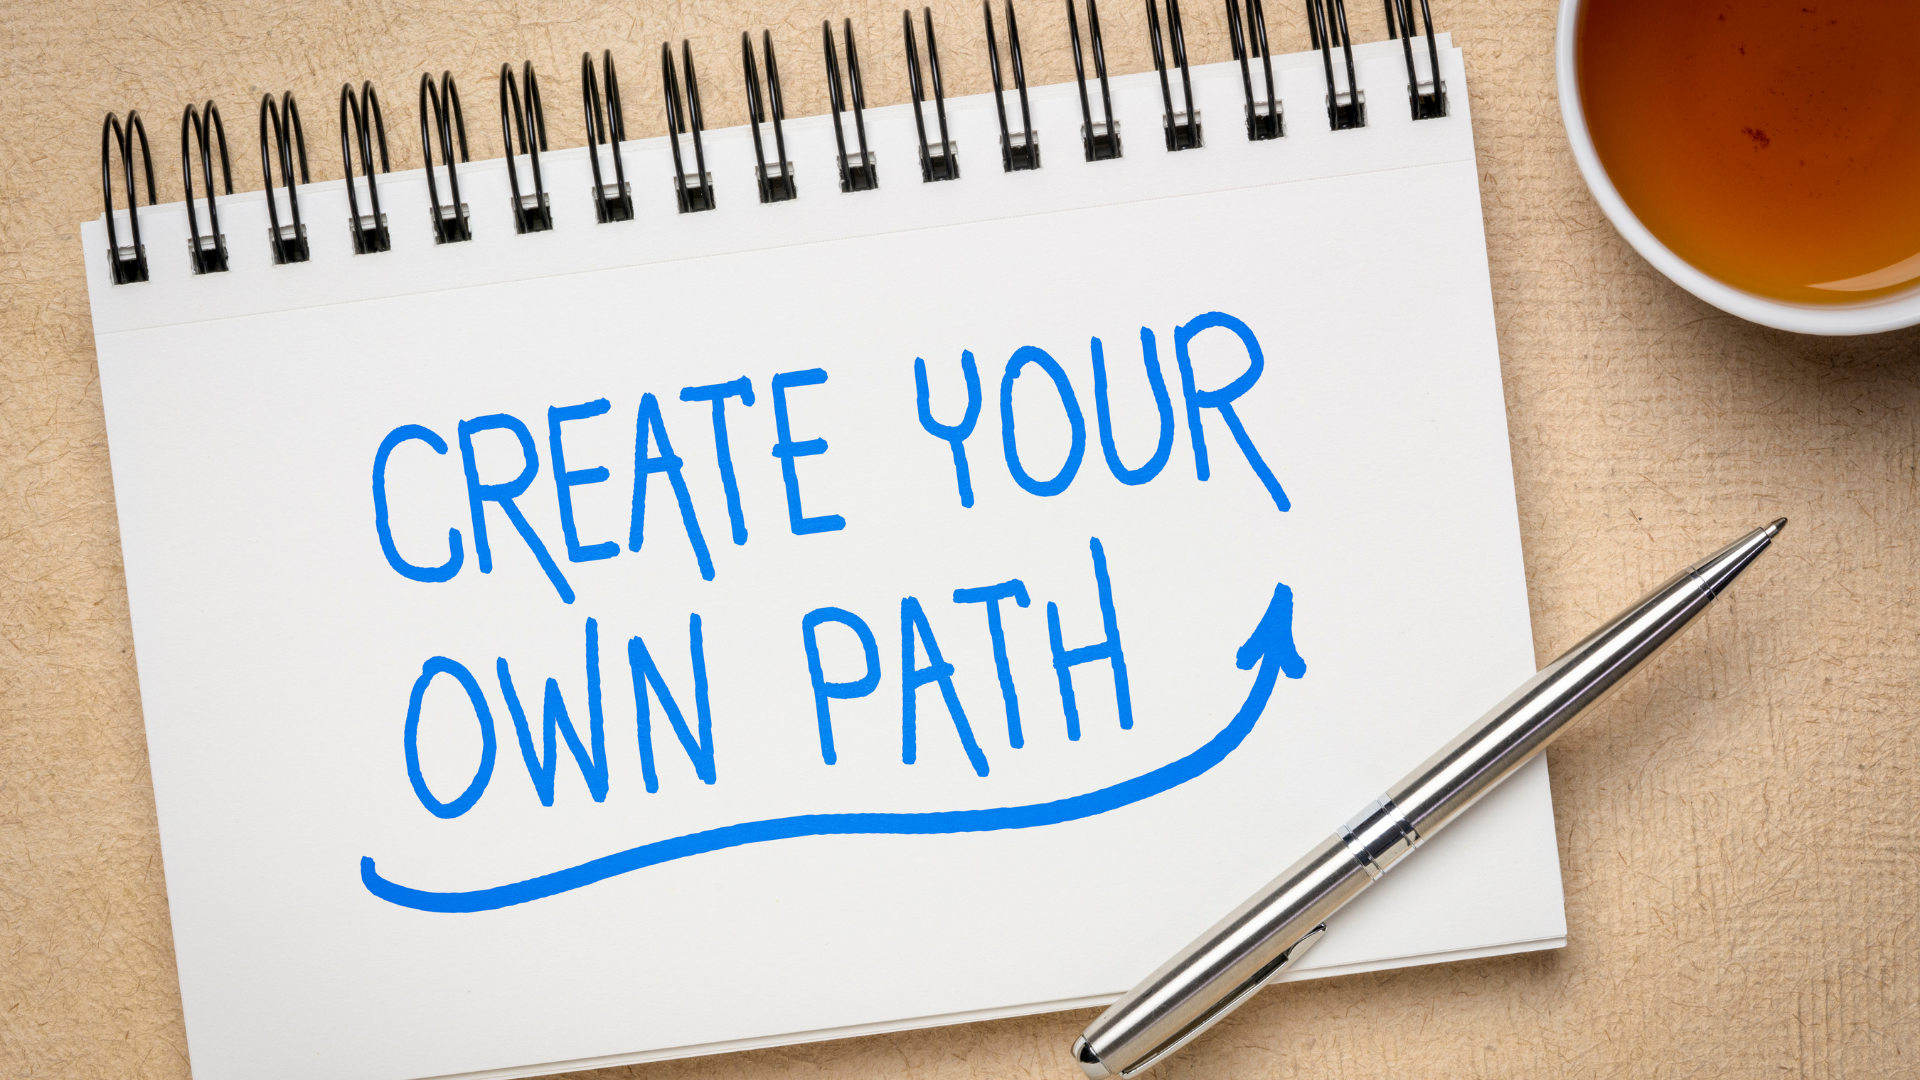 create your own path